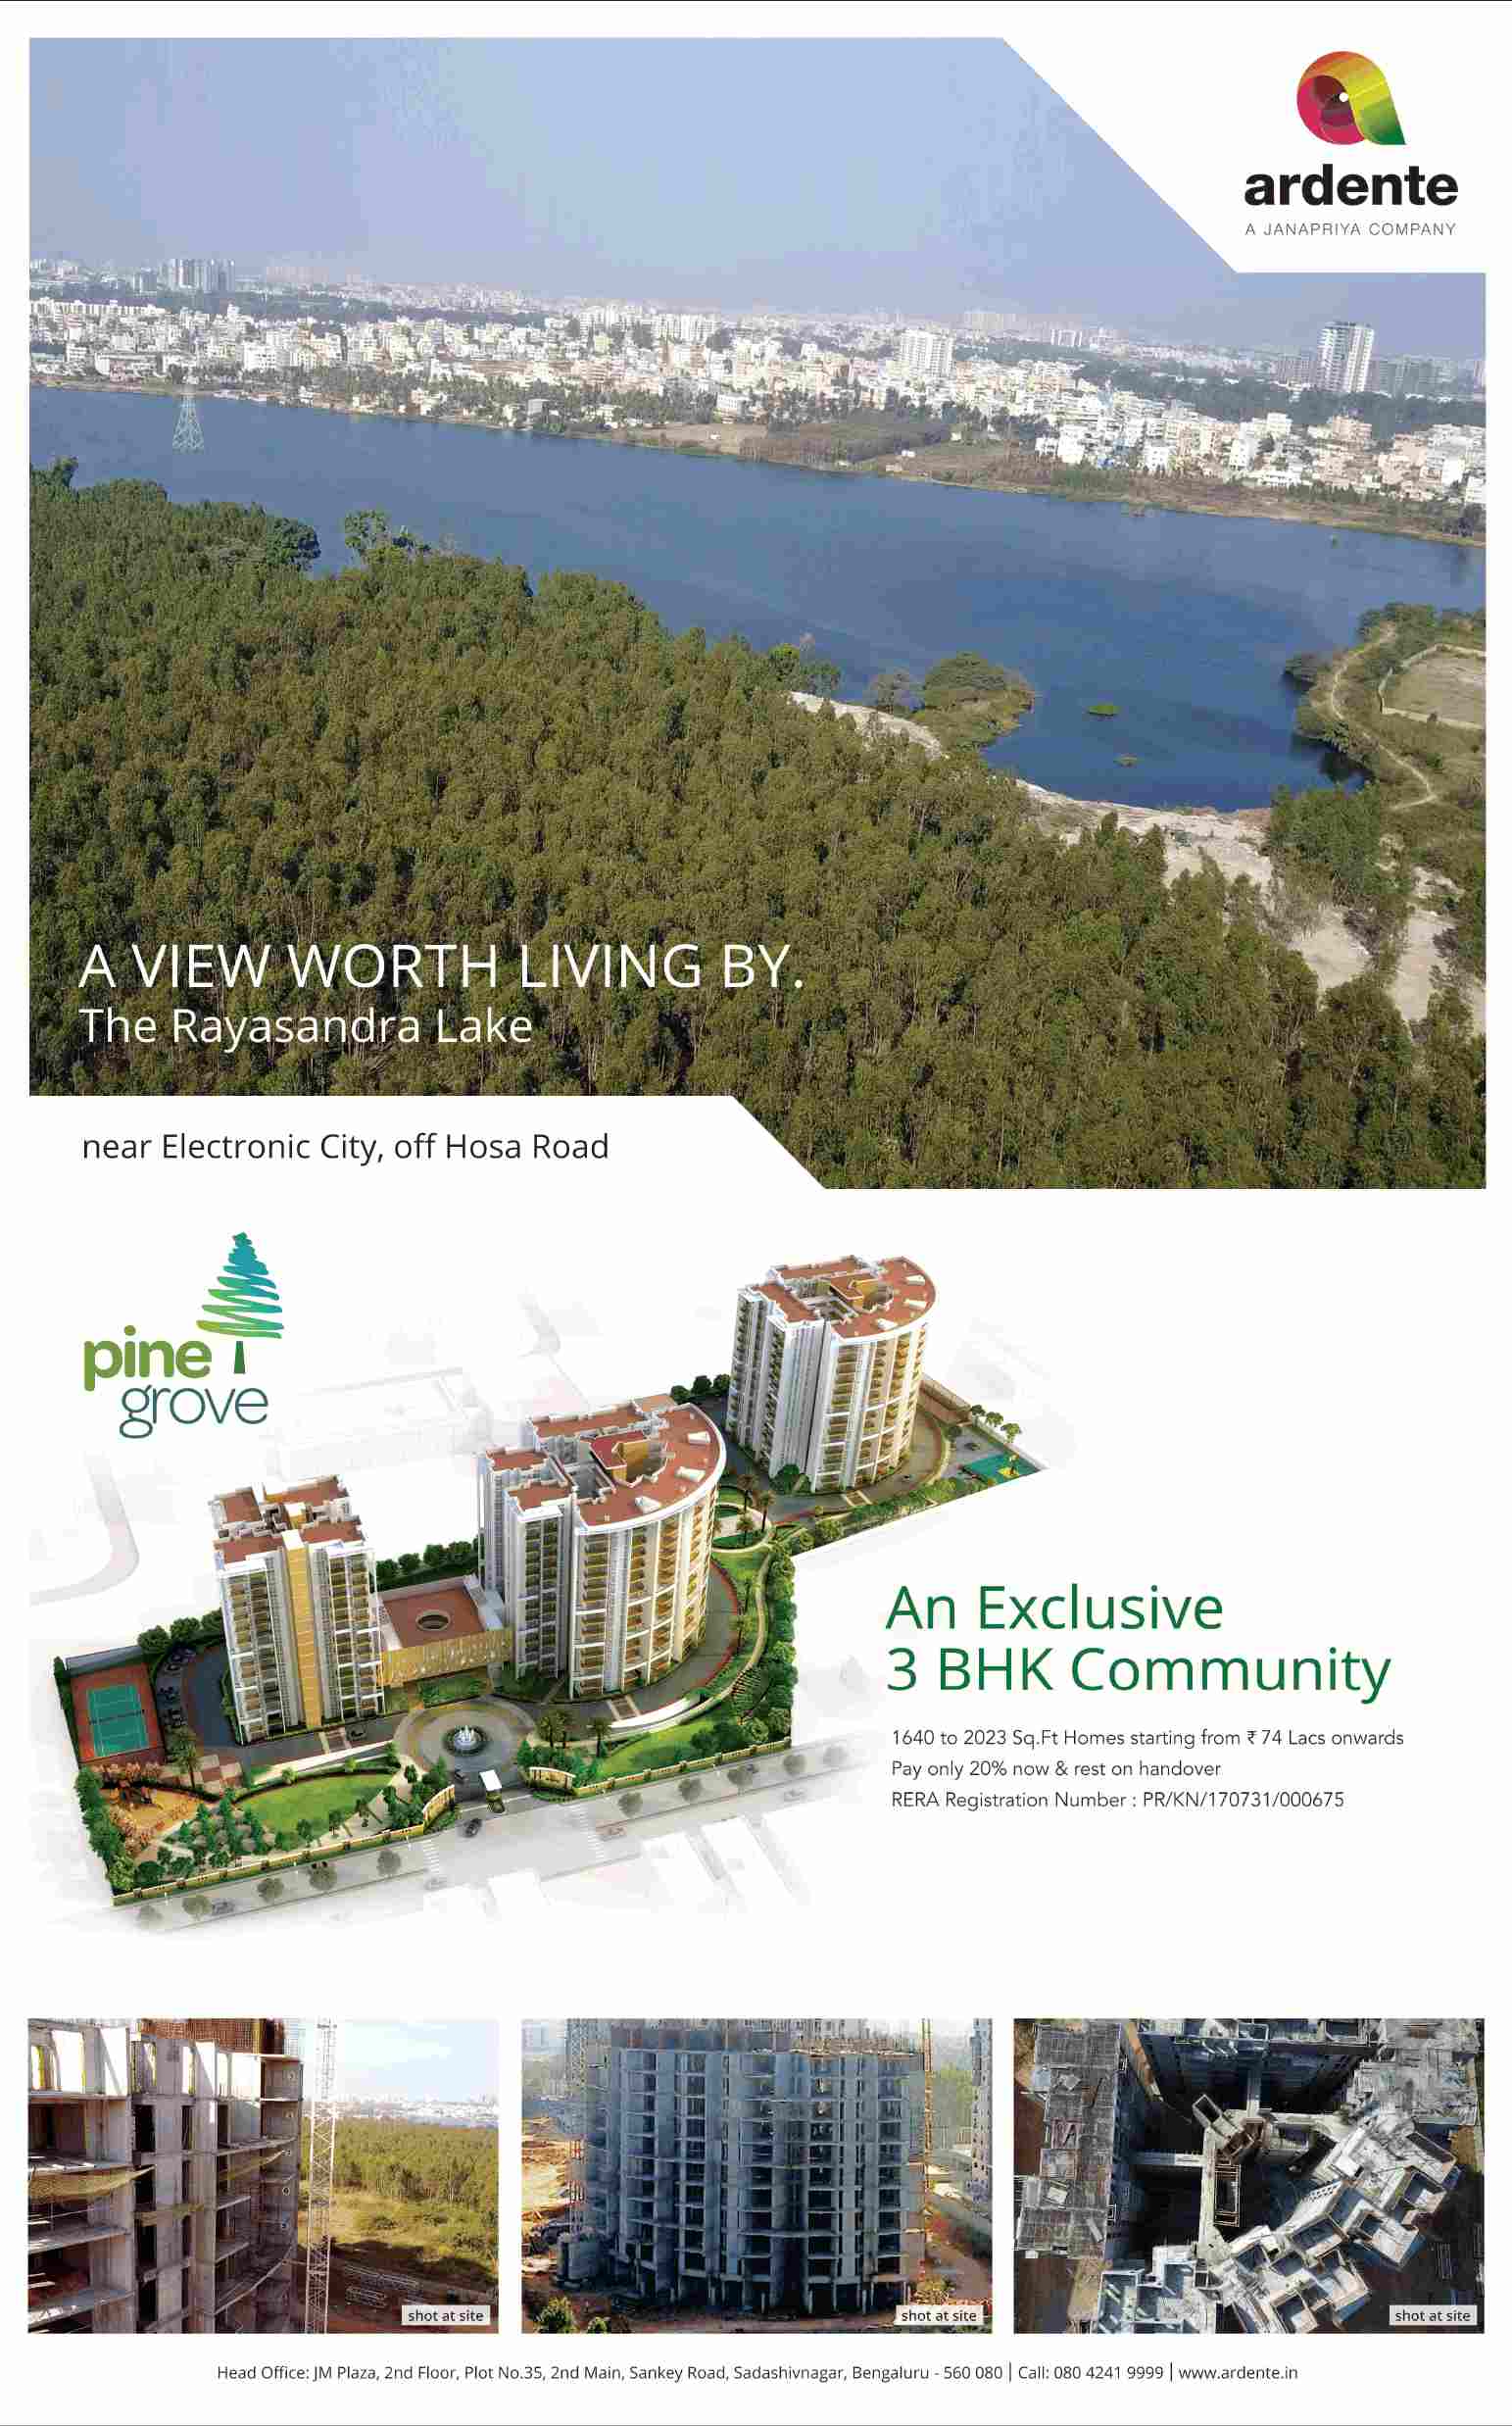 Pay only 20% now and rest on handover at Ardente Pine Grove in Bangalore Update